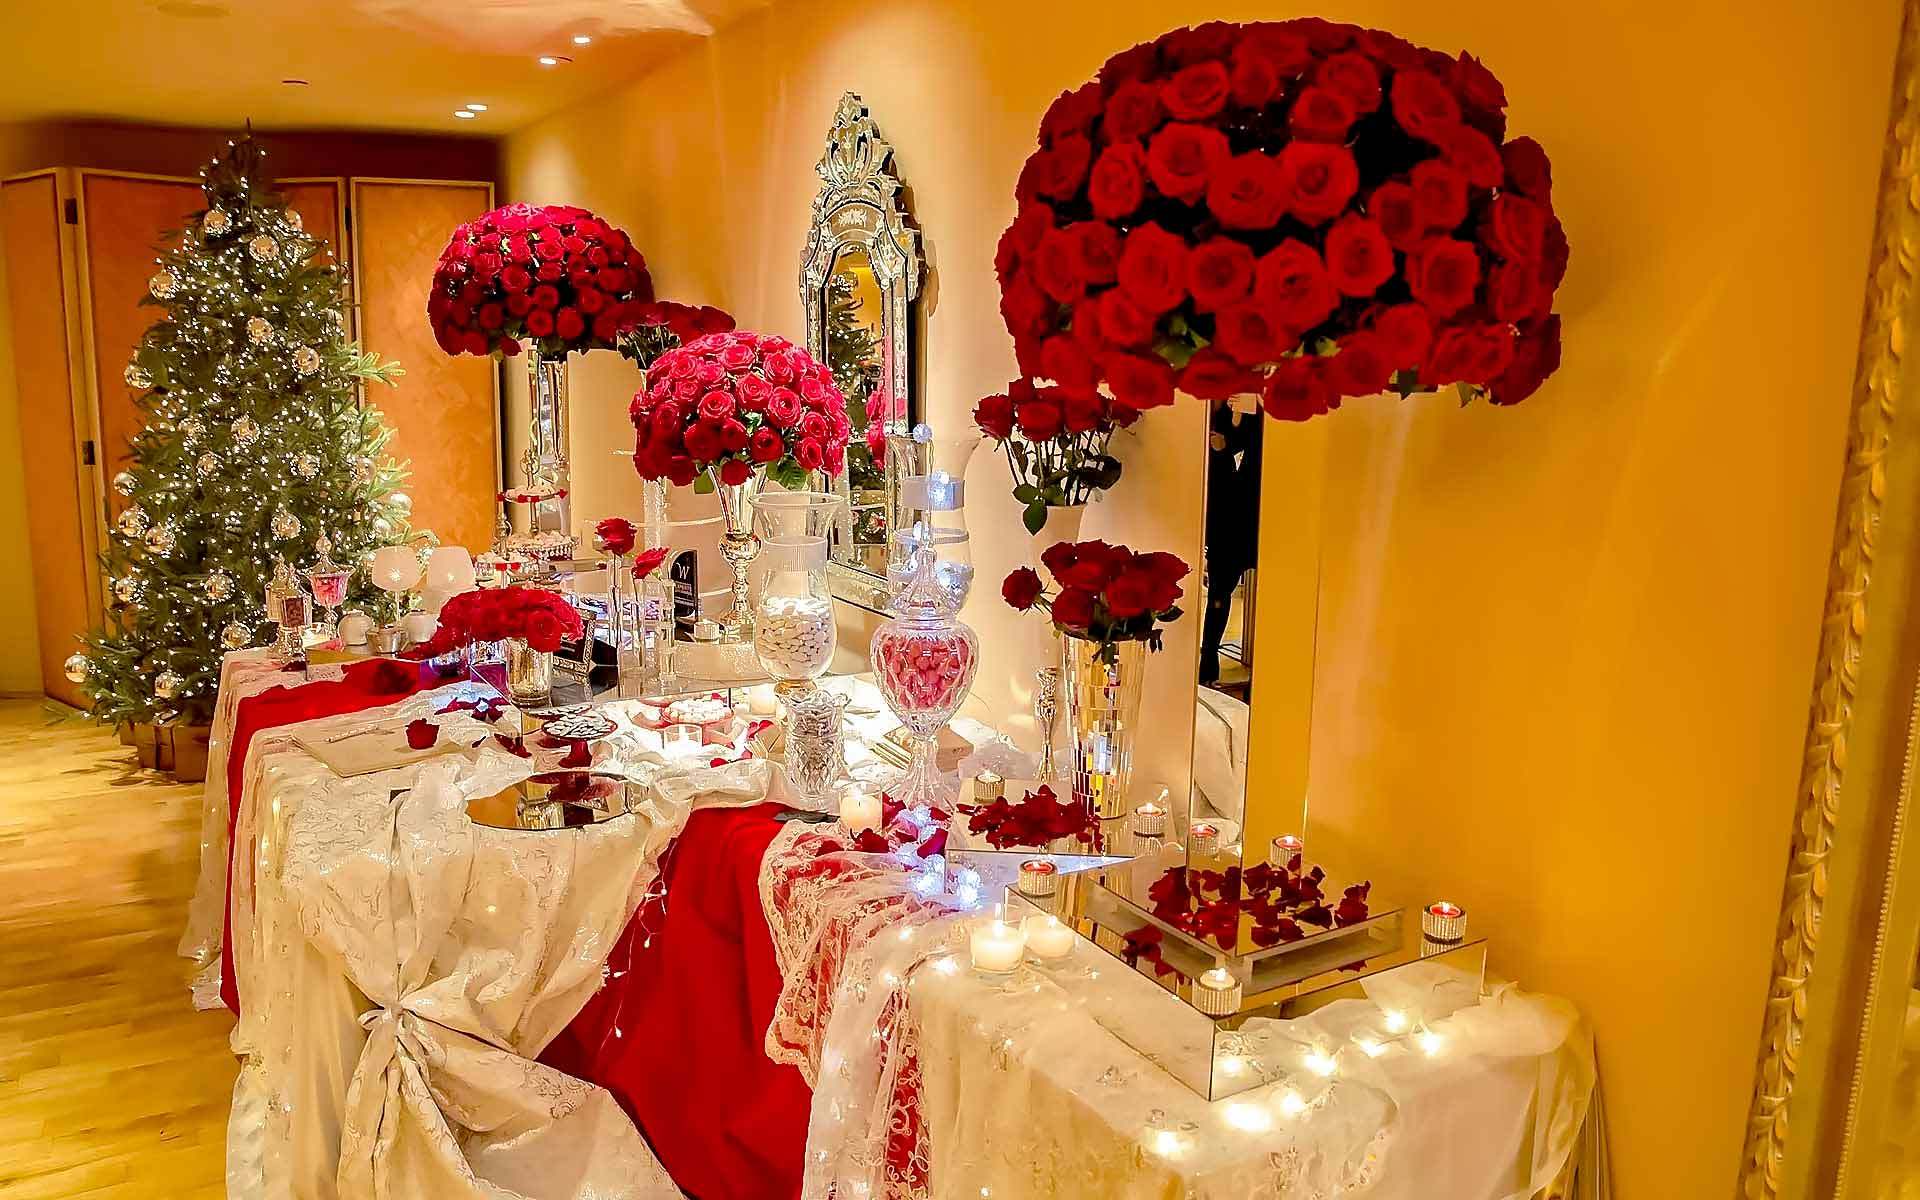 Luxurious-Christmas-Wedding-Reception-Decoration-With-Avalanche-Red-Roses